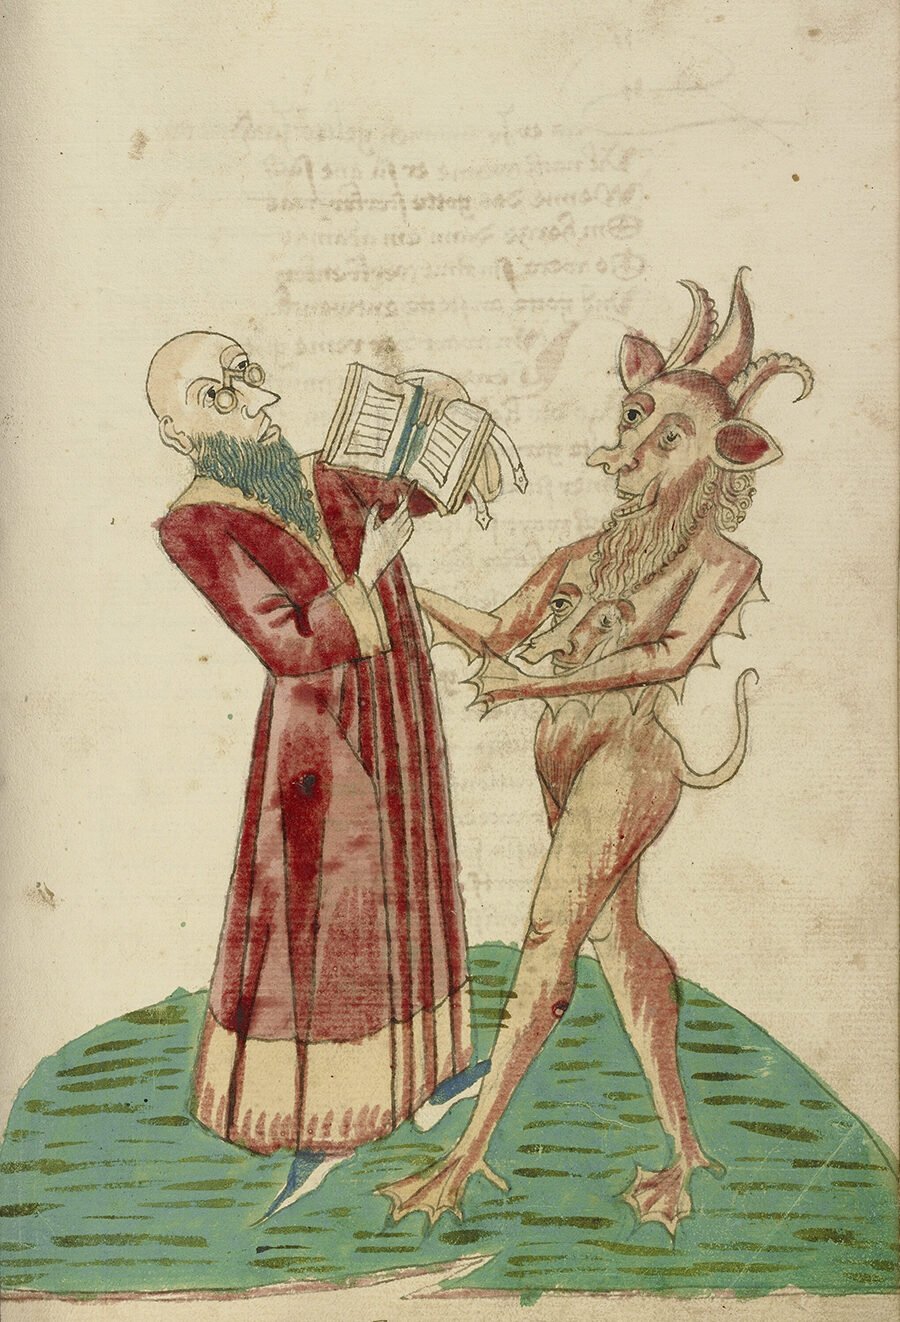 Theodas with the book of magic and the devil, from Barlaam und Josaphat, 1469. Courtesy the Getty Center